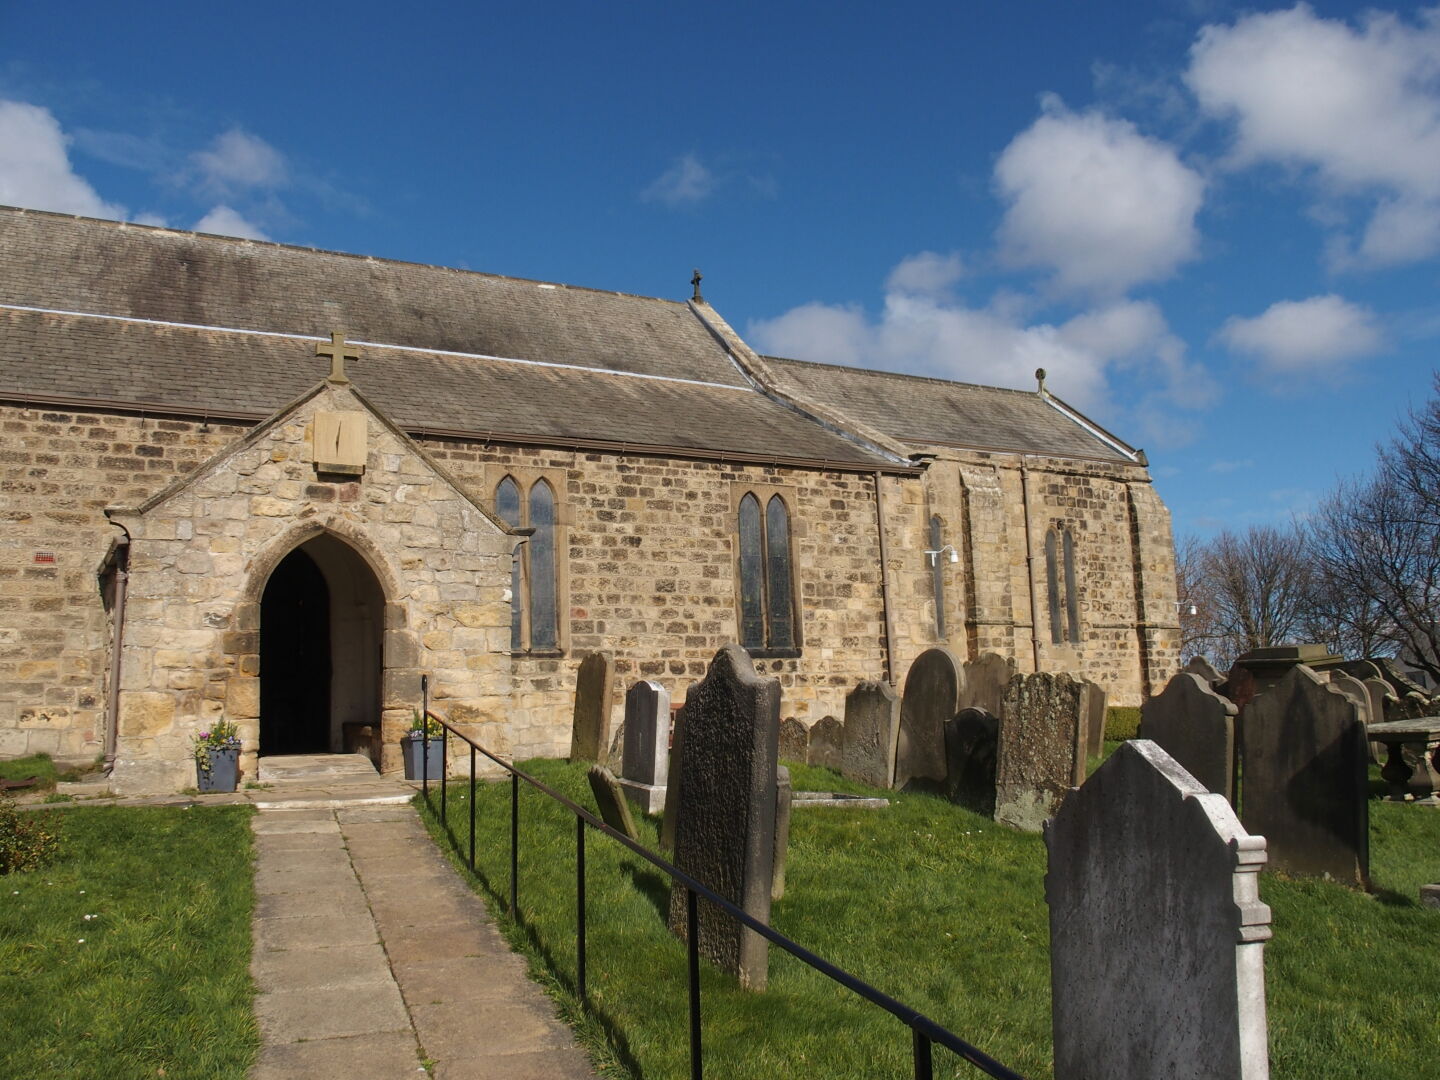 St. Andrews Church in Heddon-on-the-Wall.